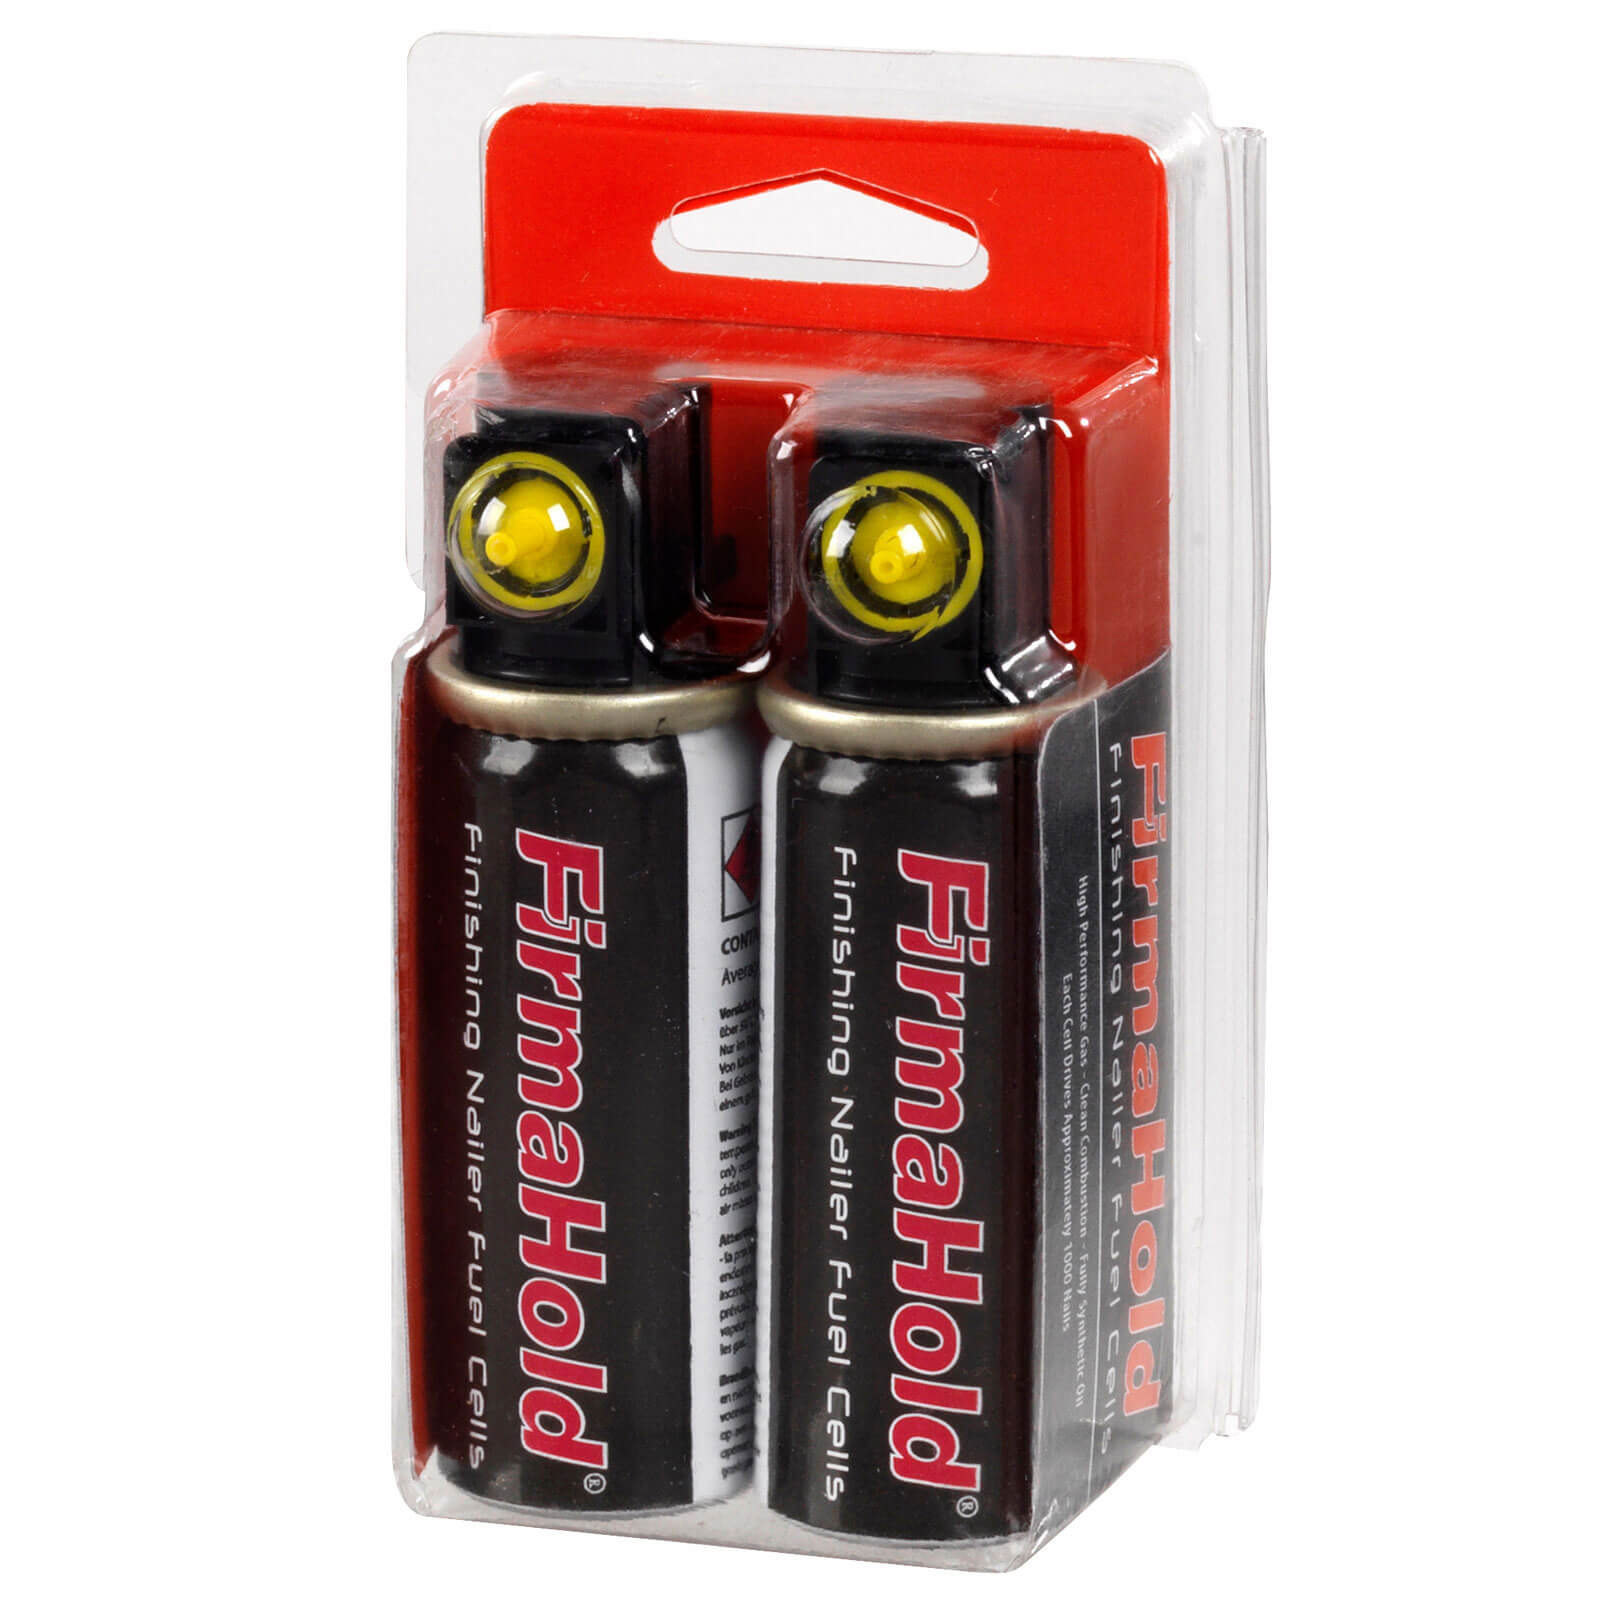 Image of Firmahold Second Fix Gas Nail Fuel Cell Pack of 2